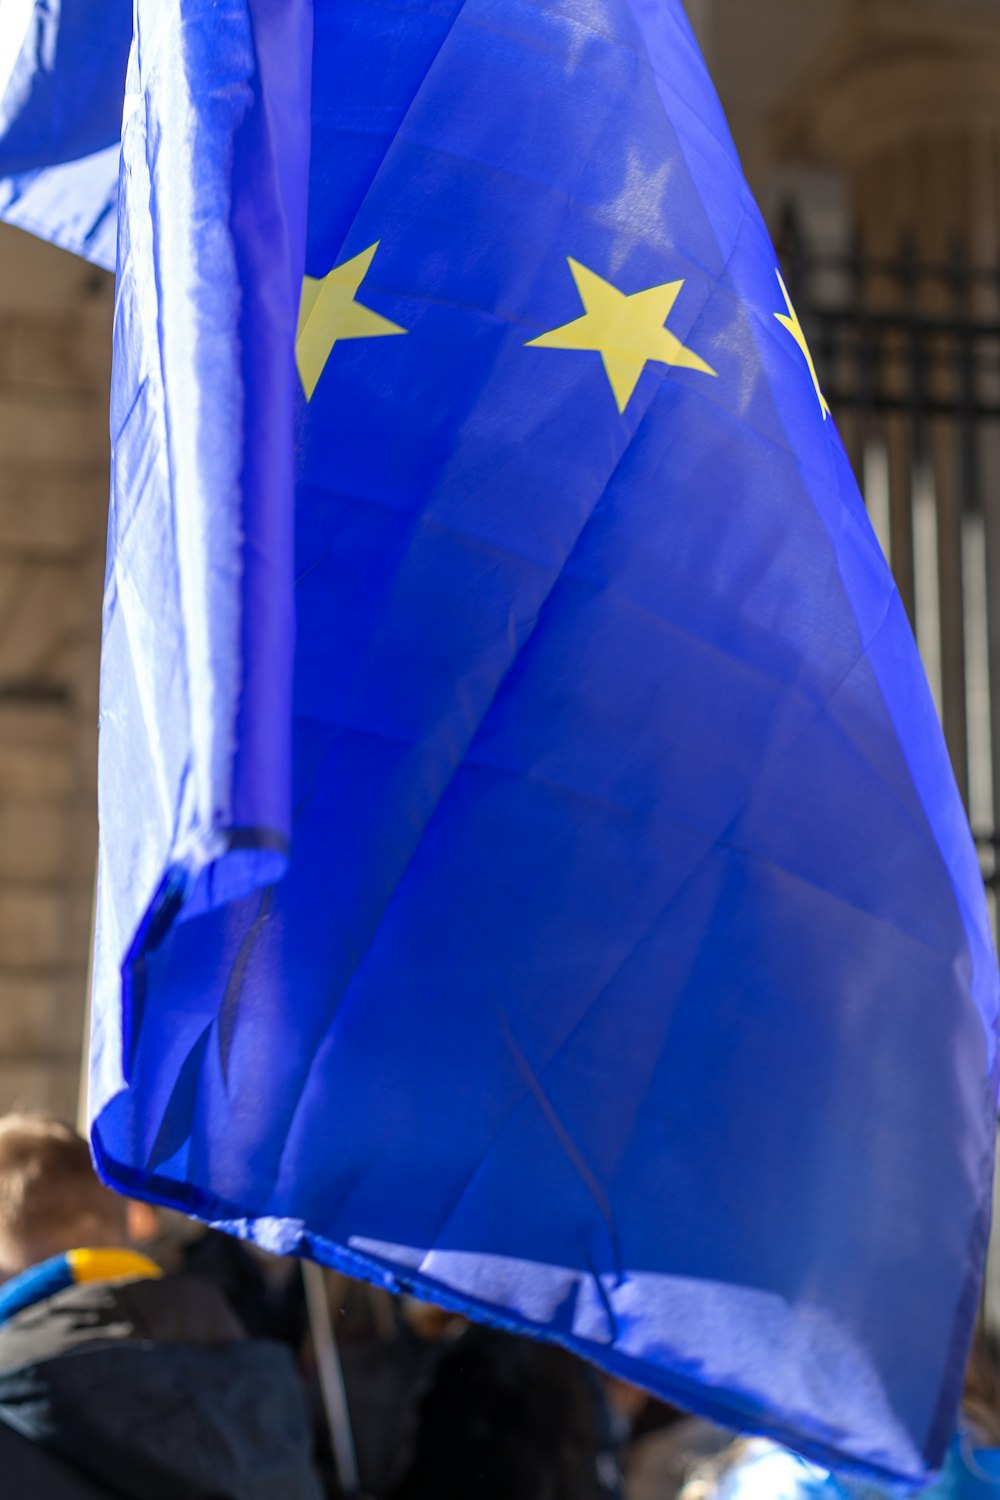 a blue flag with yellow stars on it